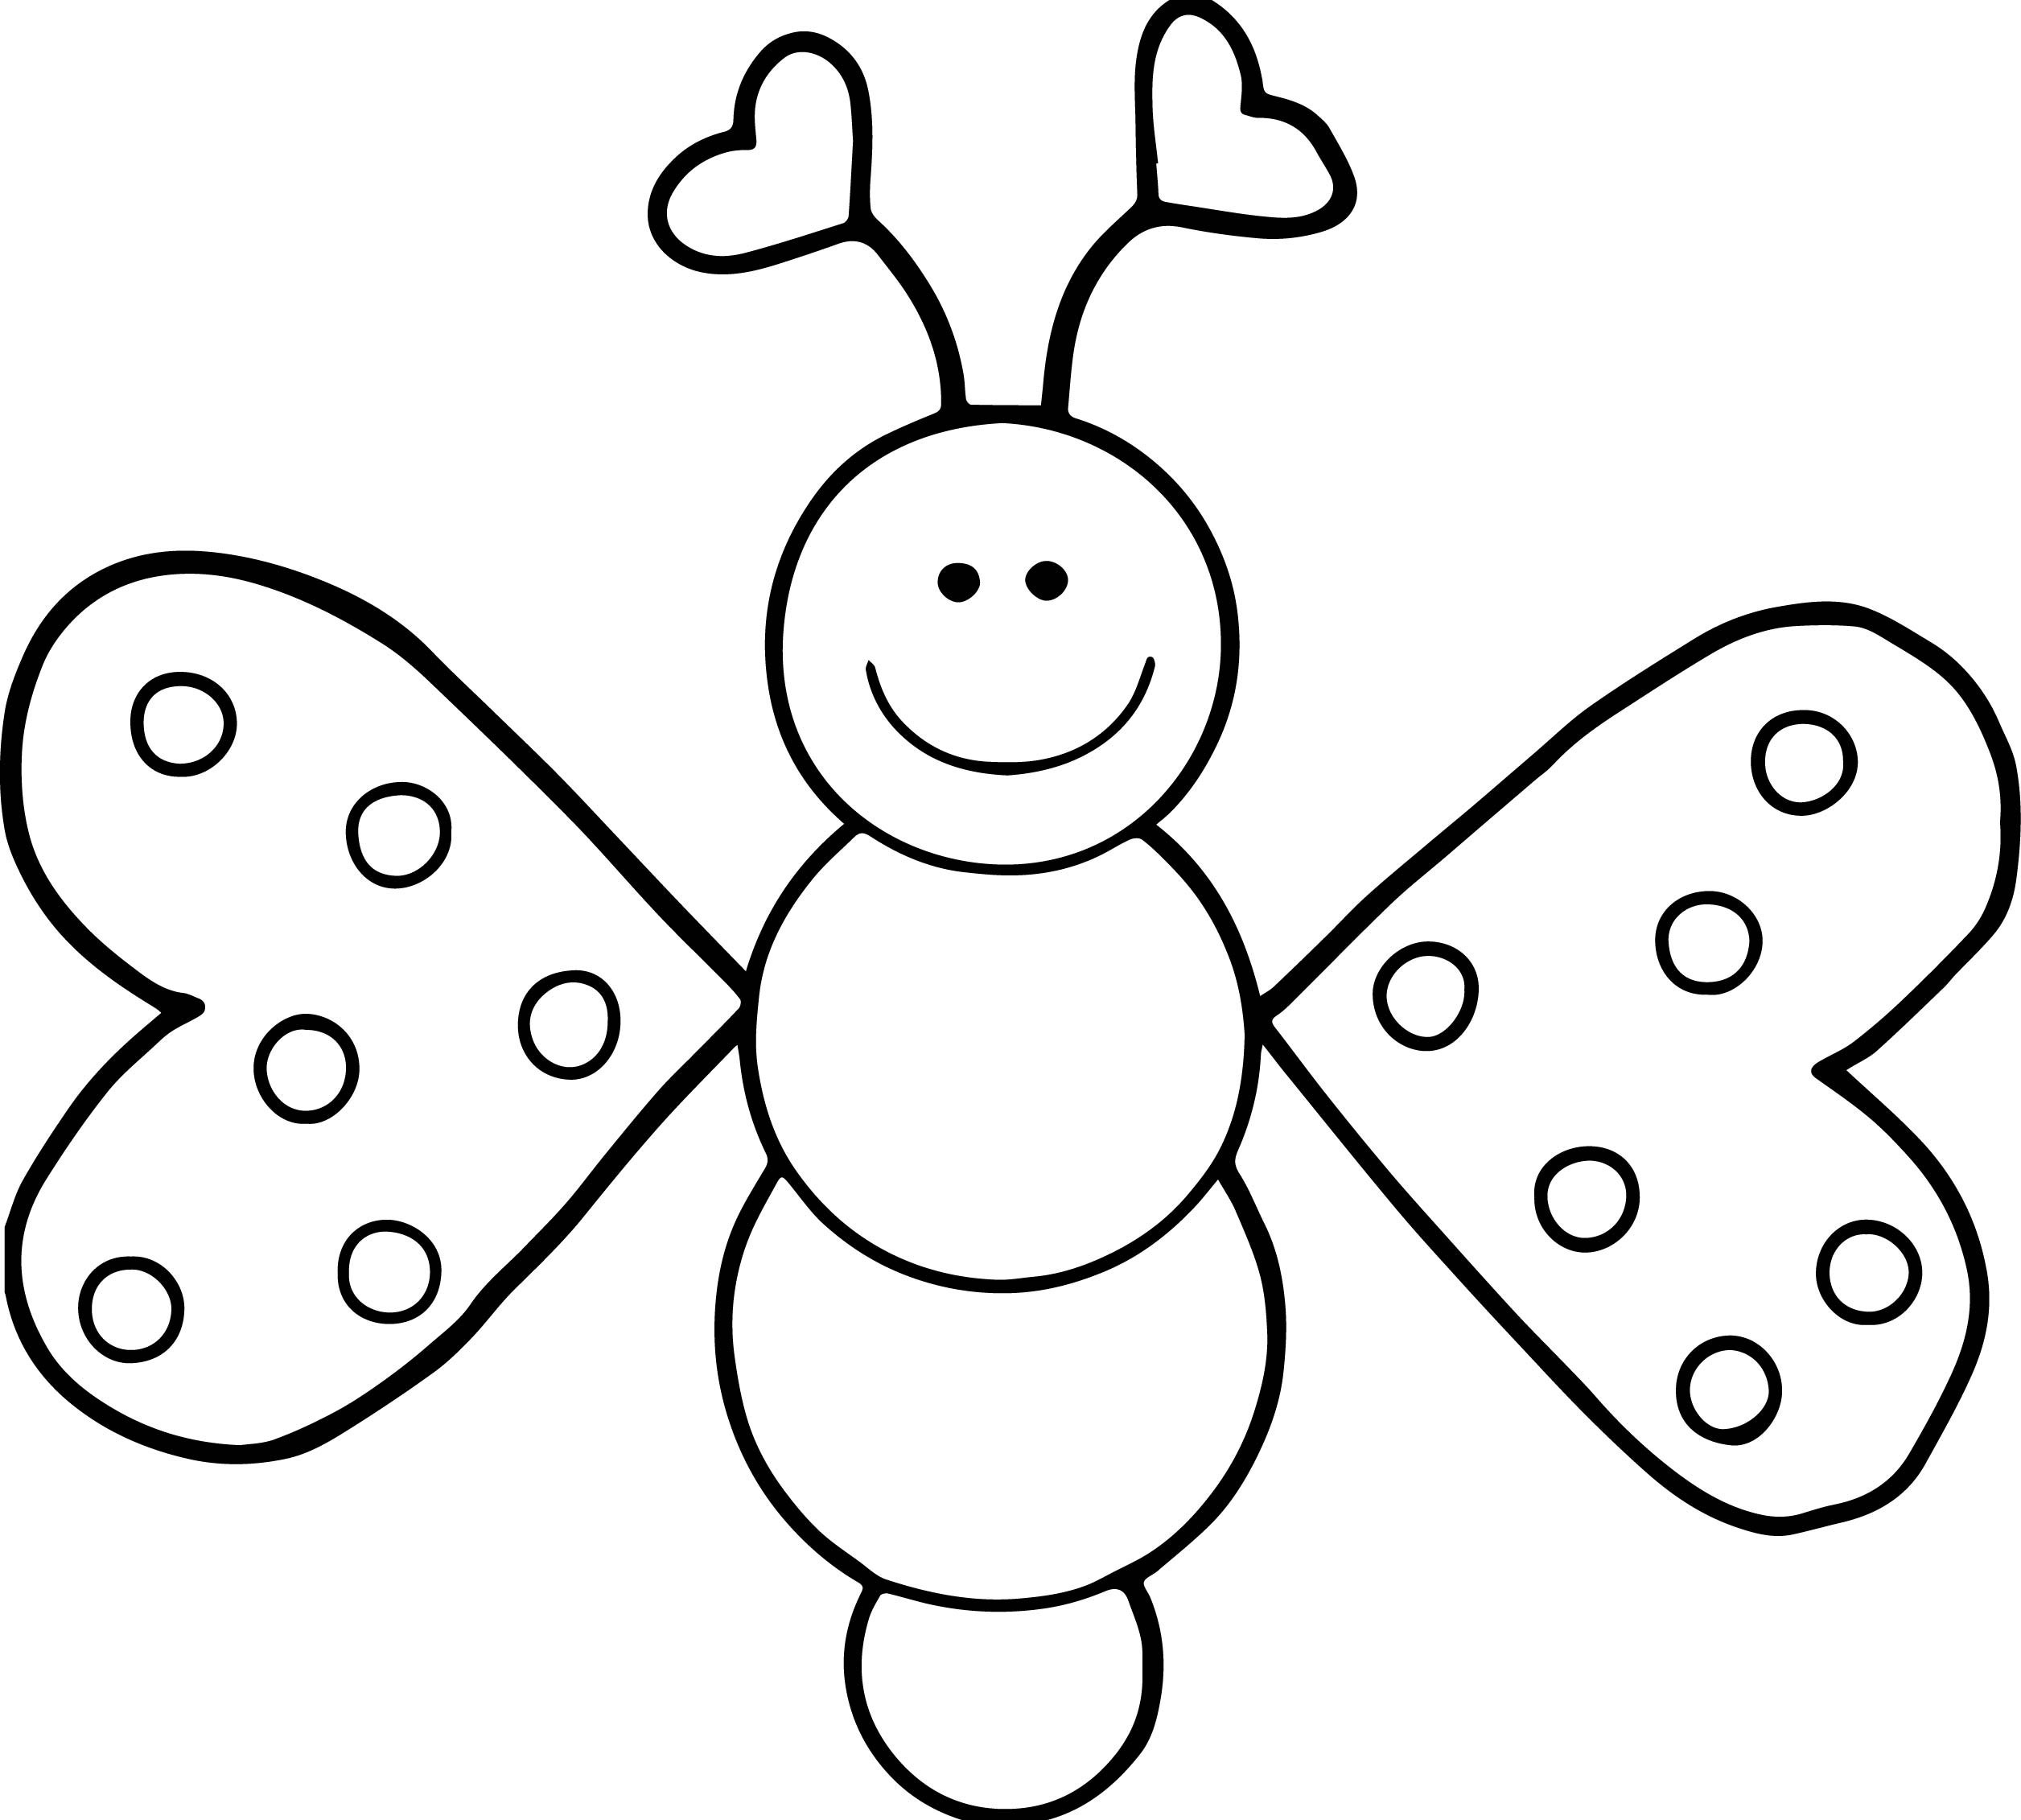 Cartoon Butterflies Coloring Pages Colouring Mini Coloriage 2 16 For Your Iron Man With In 419shco